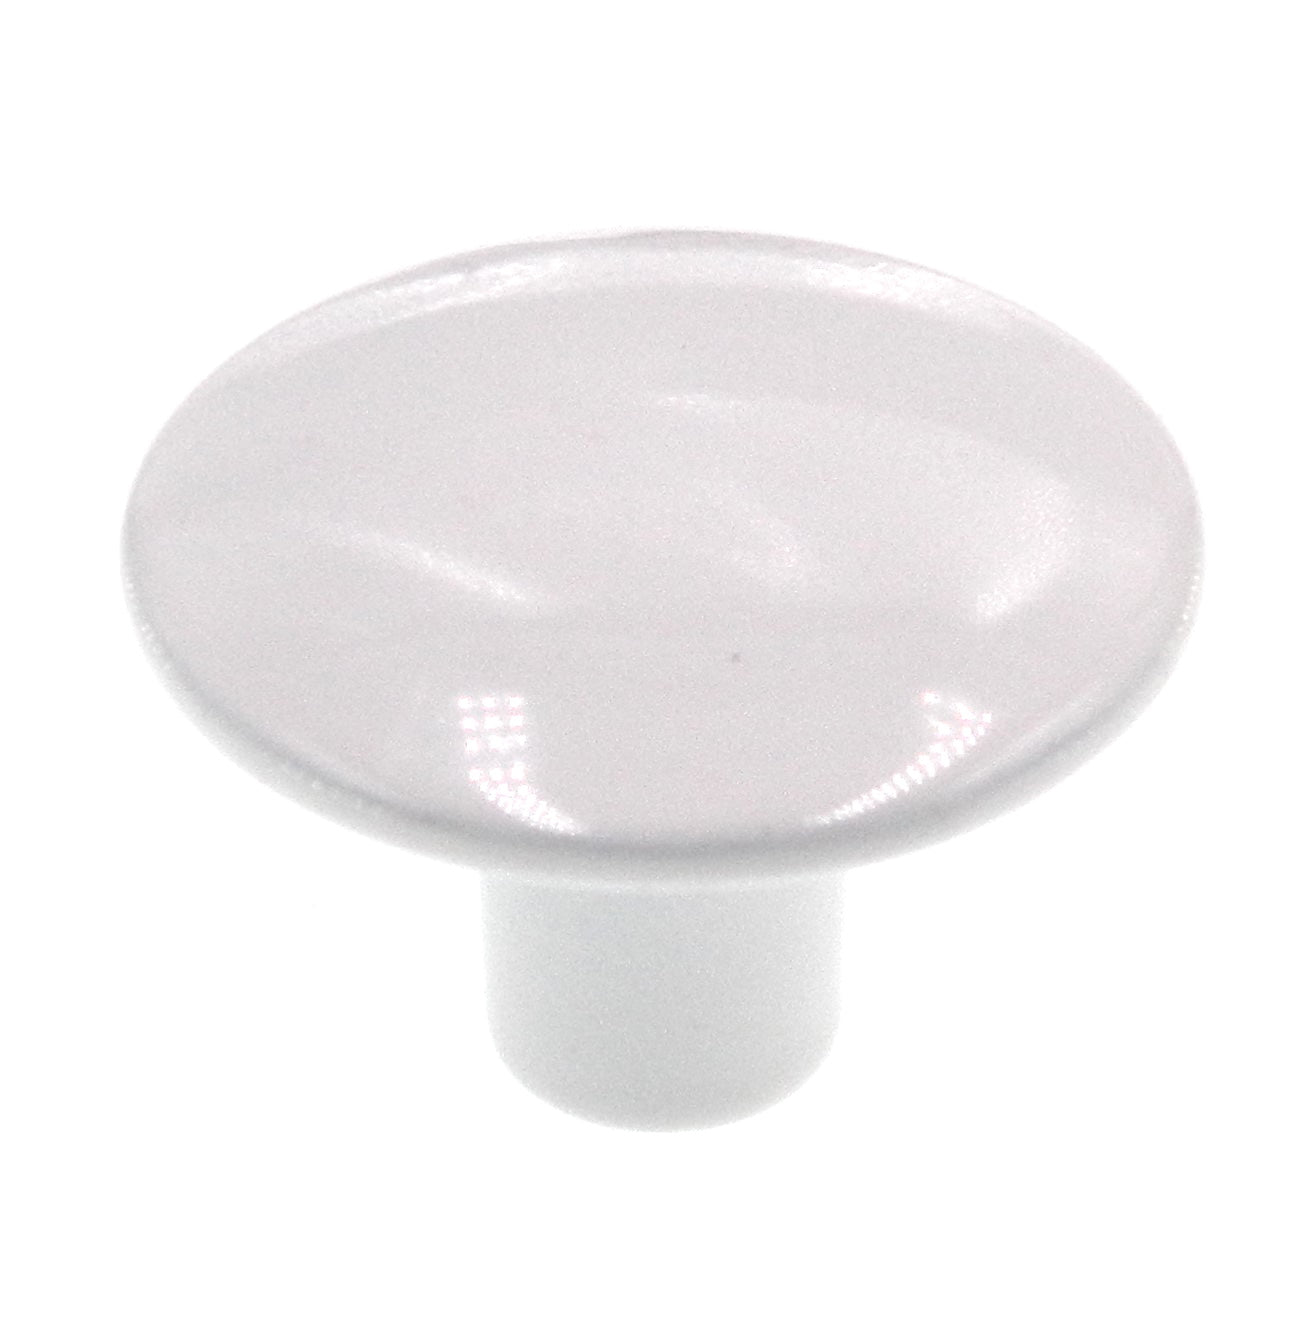 Amerock Forges White 1-3/16" Round Cabinet Knob B312-B-W Made in Italy